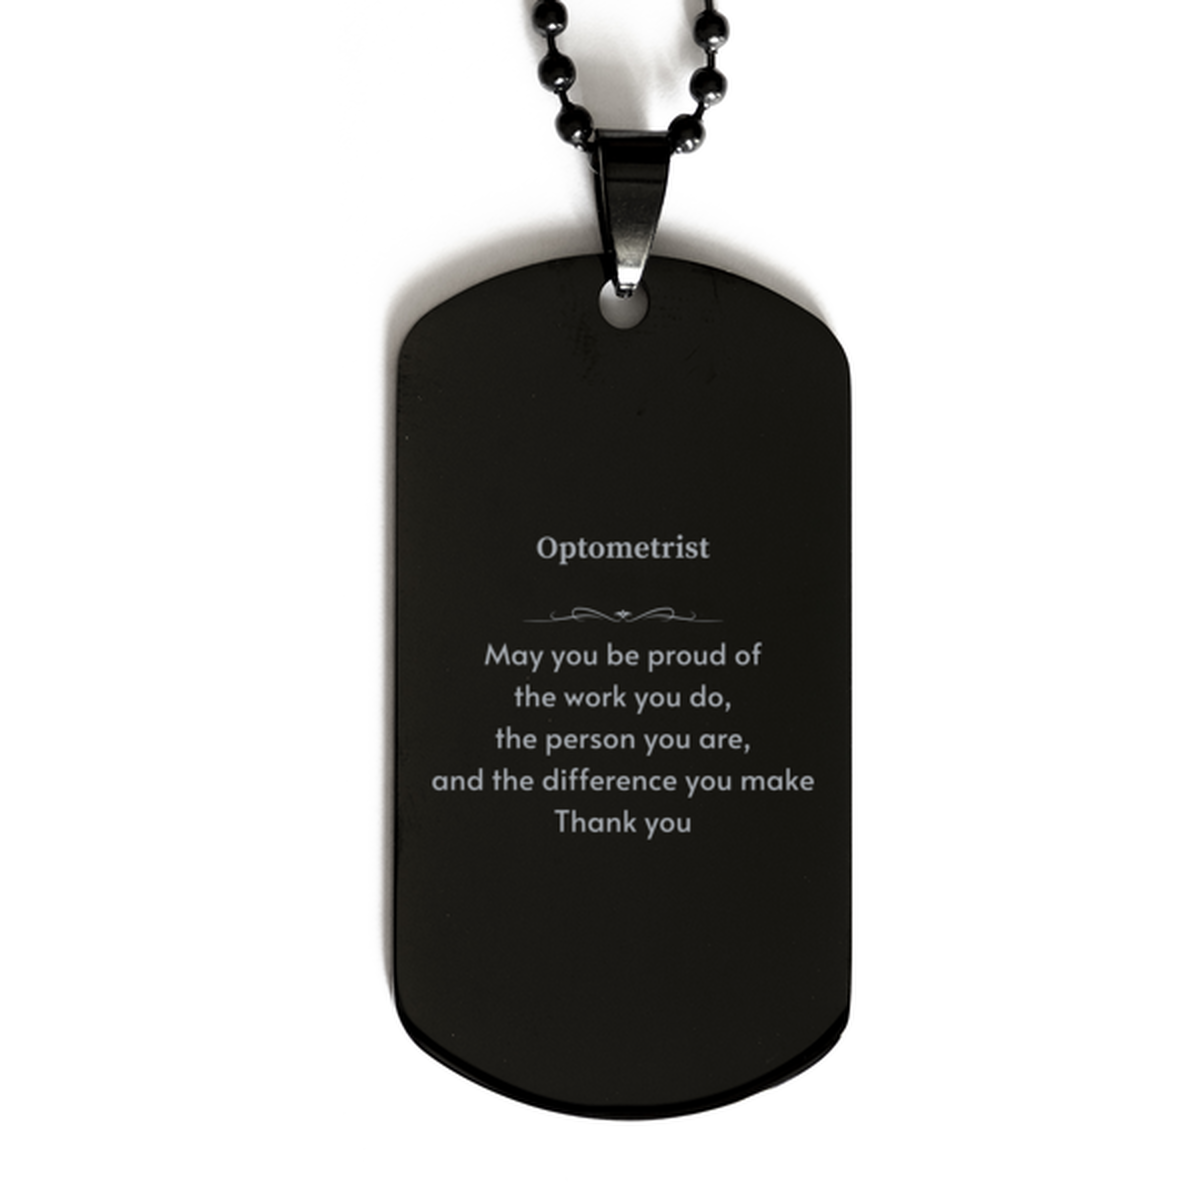 Heartwarming Black Dog Tag Retirement Coworkers Gifts for Optometrist, Optometrist May You be proud of the work you do, the person you are Gifts for Boss Men Women Friends